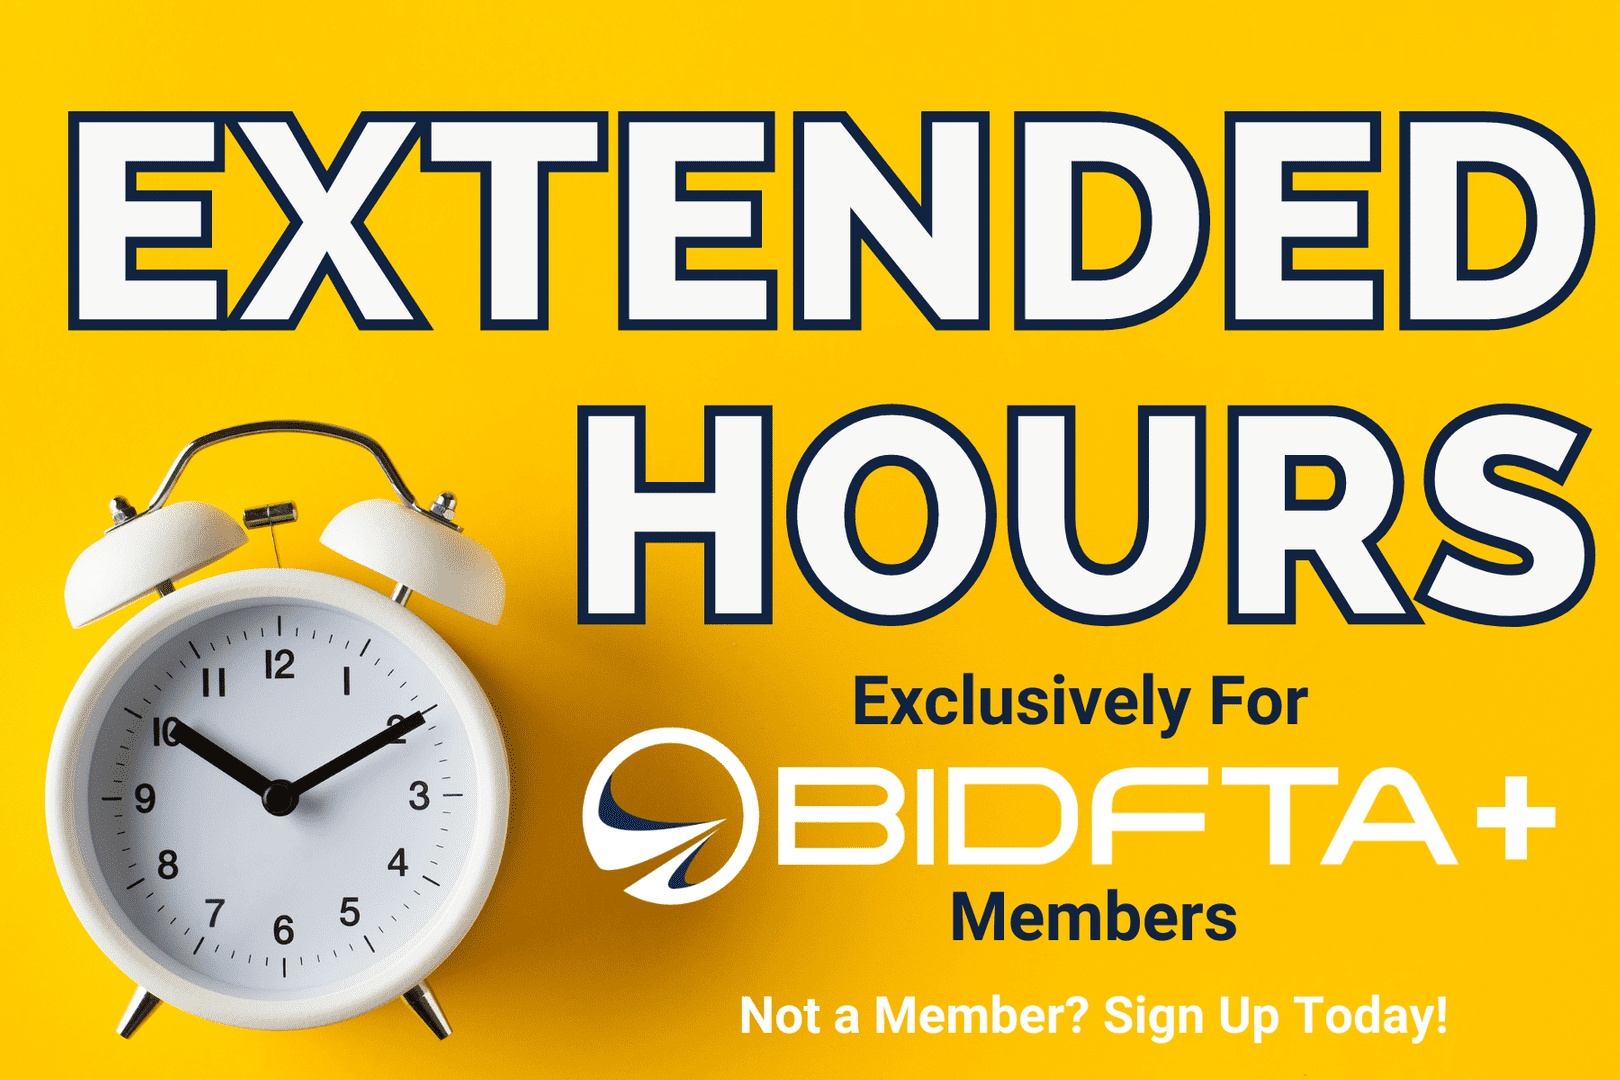 For BidFTA  Members we are pleased to announce EXTENDED pick up hours